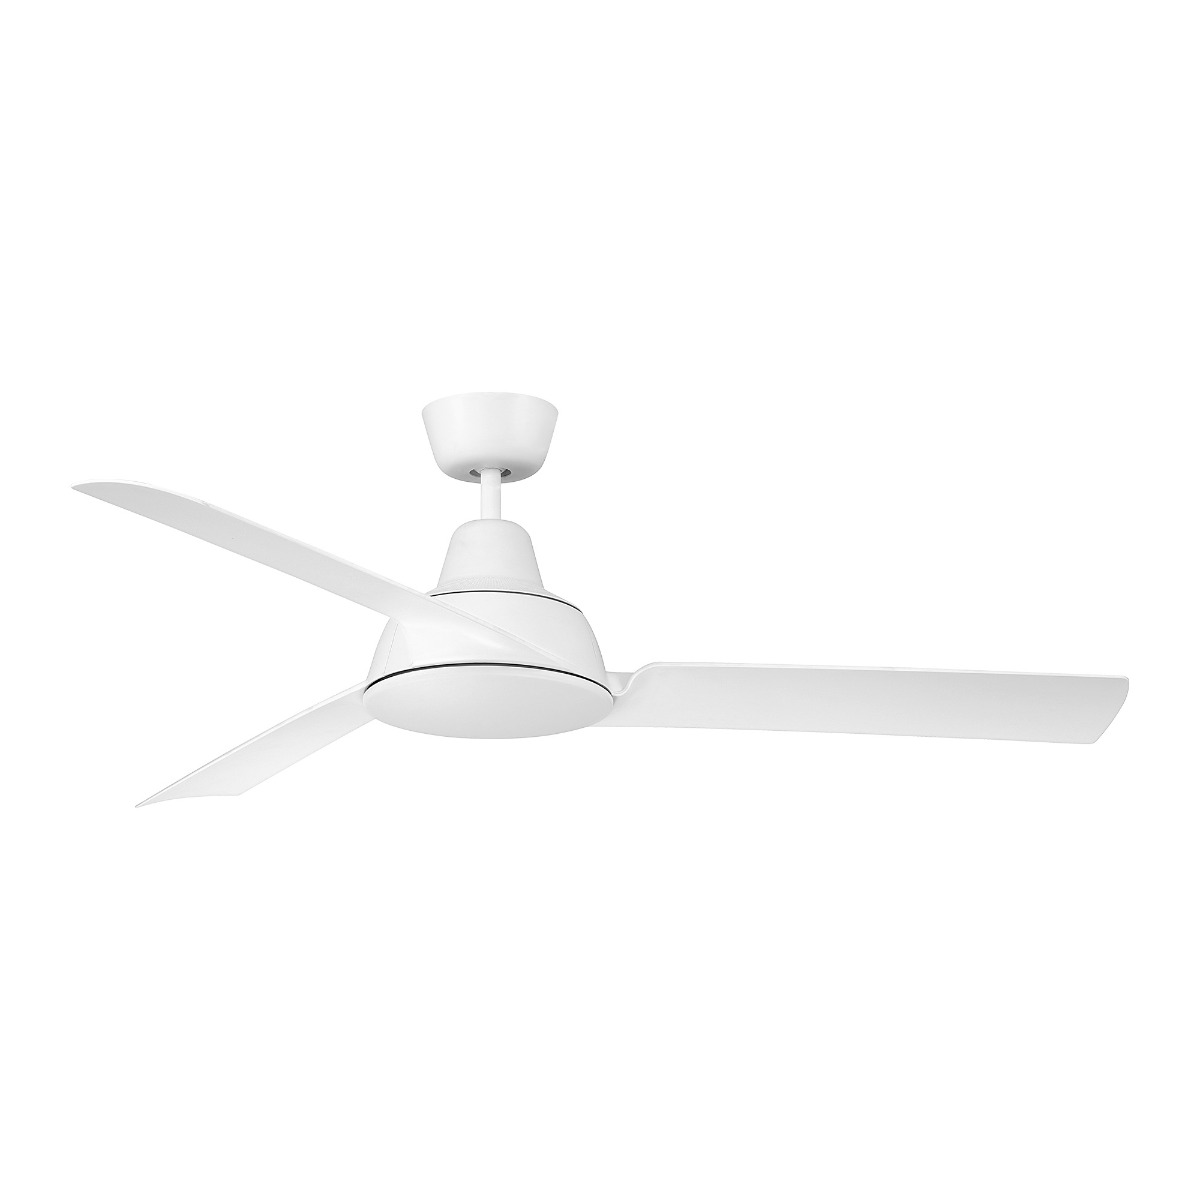 Airventure Ceiling Fan - White 52"